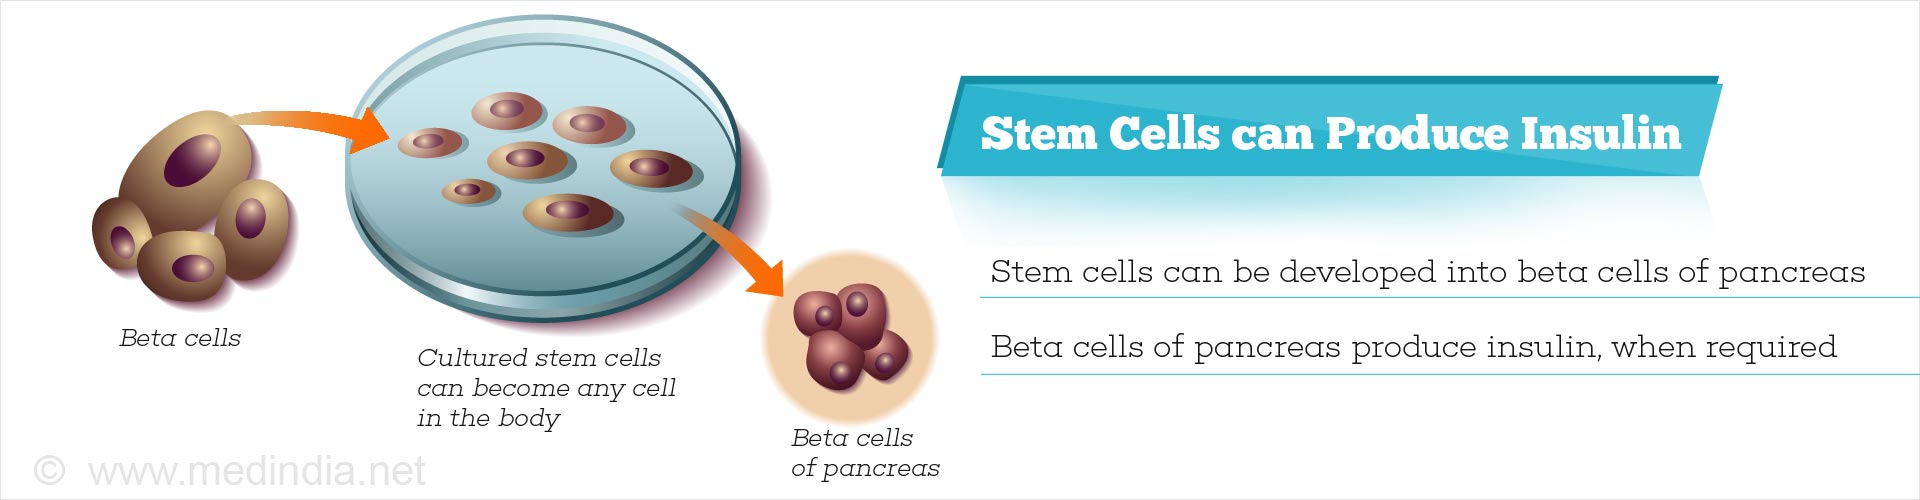 Stem cells can produce insulin
- Stem cells can be developed into beta cells of pancreas
- Beta cells of pancreas produce insulin, when required